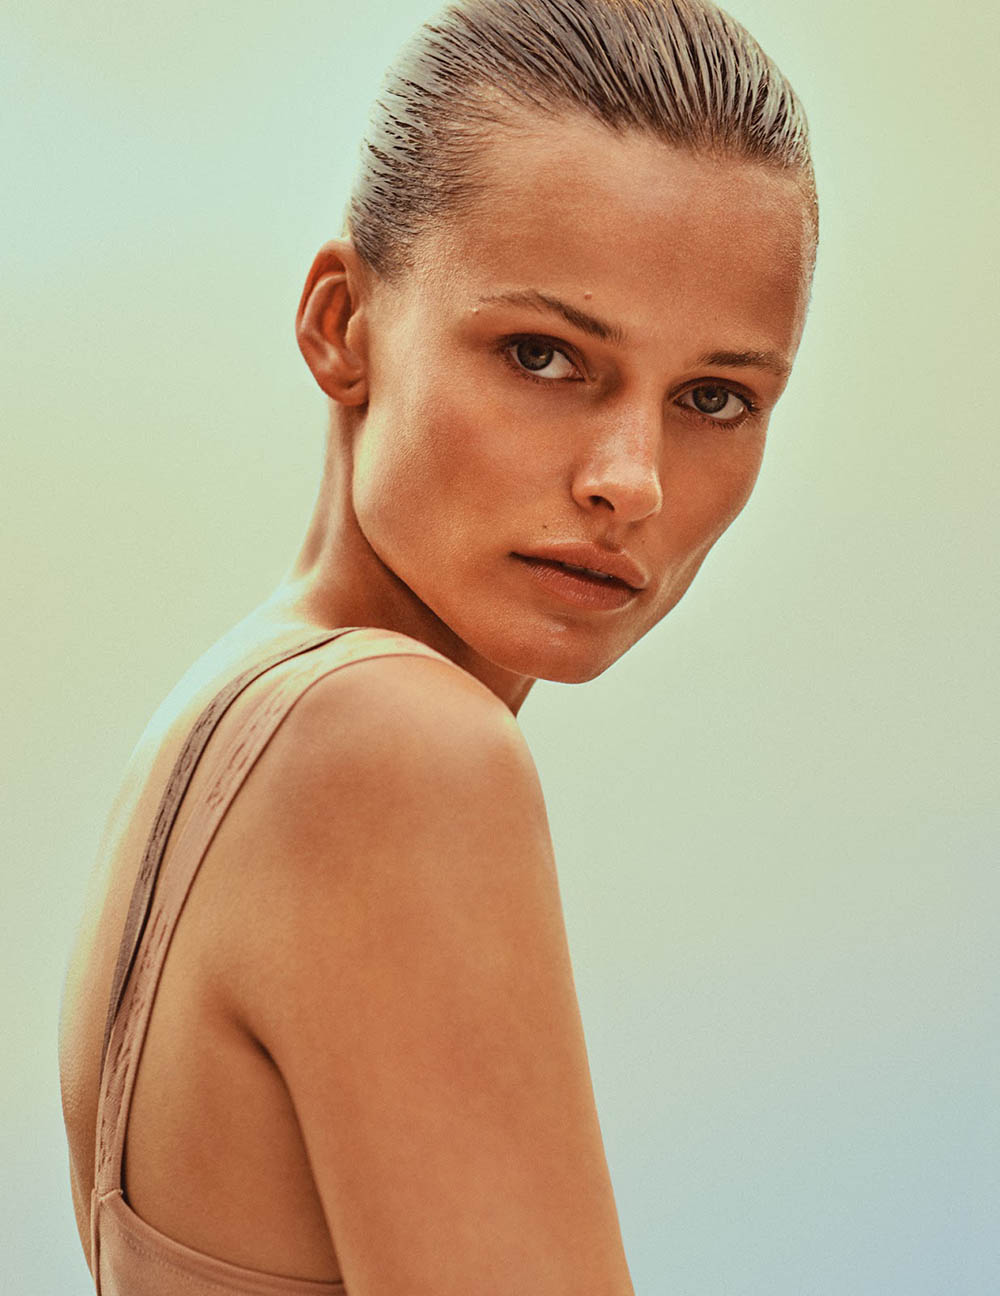 Edita Vilkeviciute covers Vogue Poland July August 2019 by Chris Colls